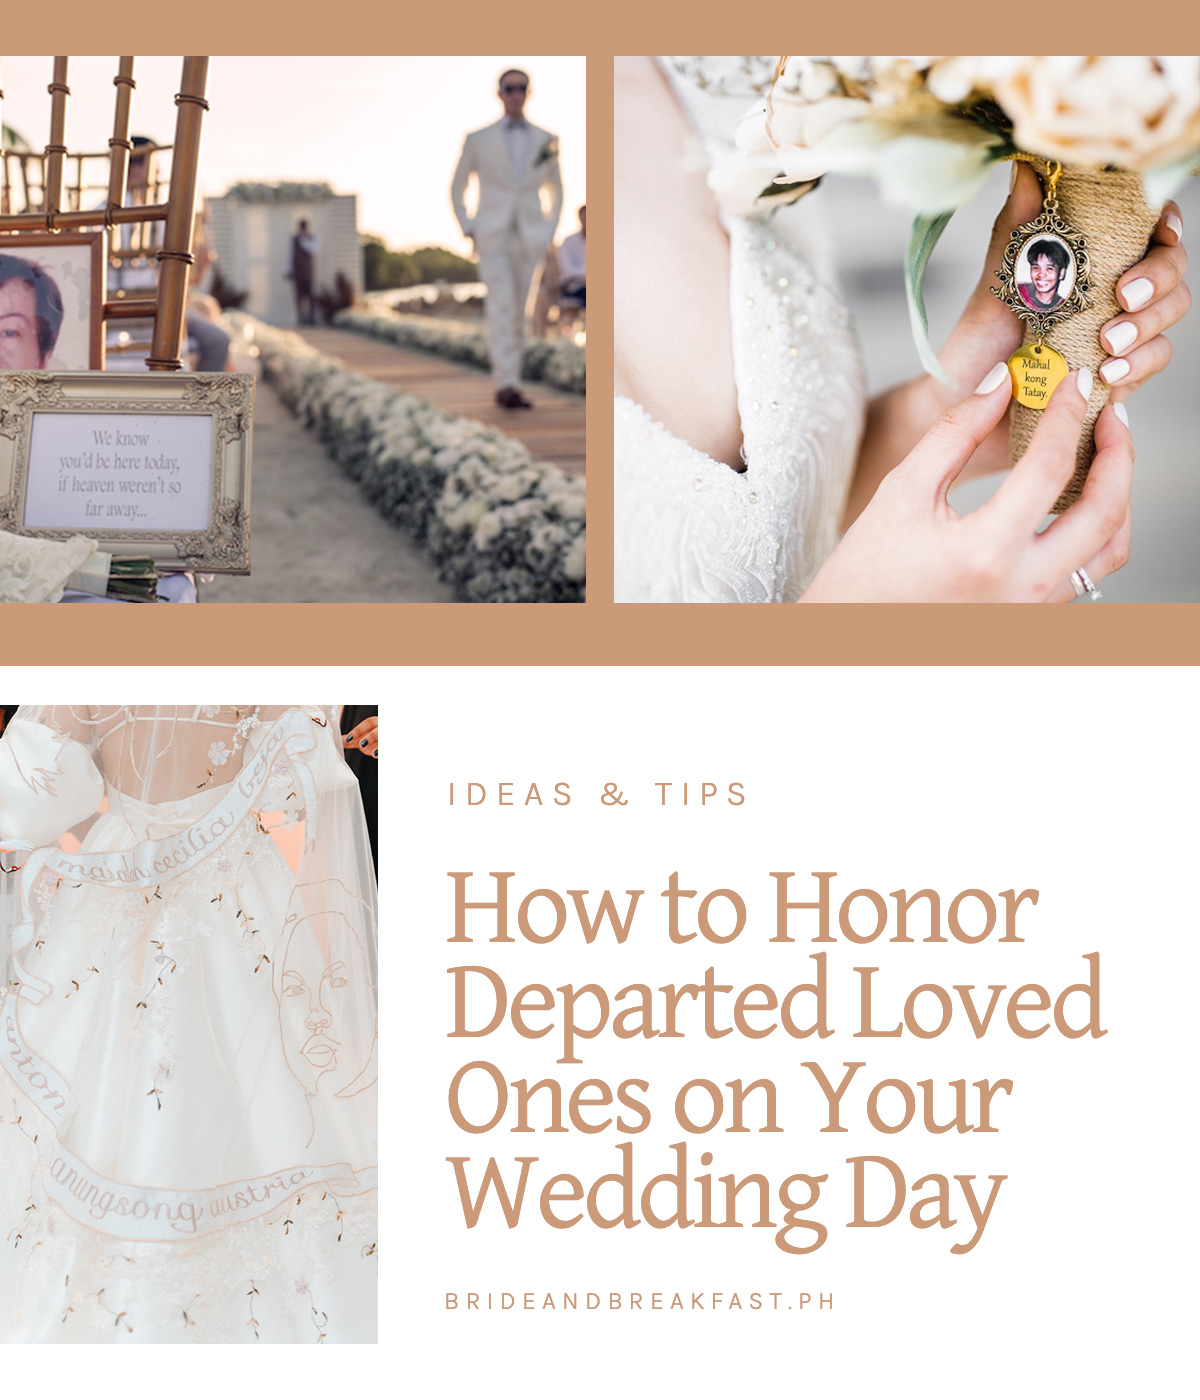 How to Honor Departed Loved Ones on Your Wedding Day